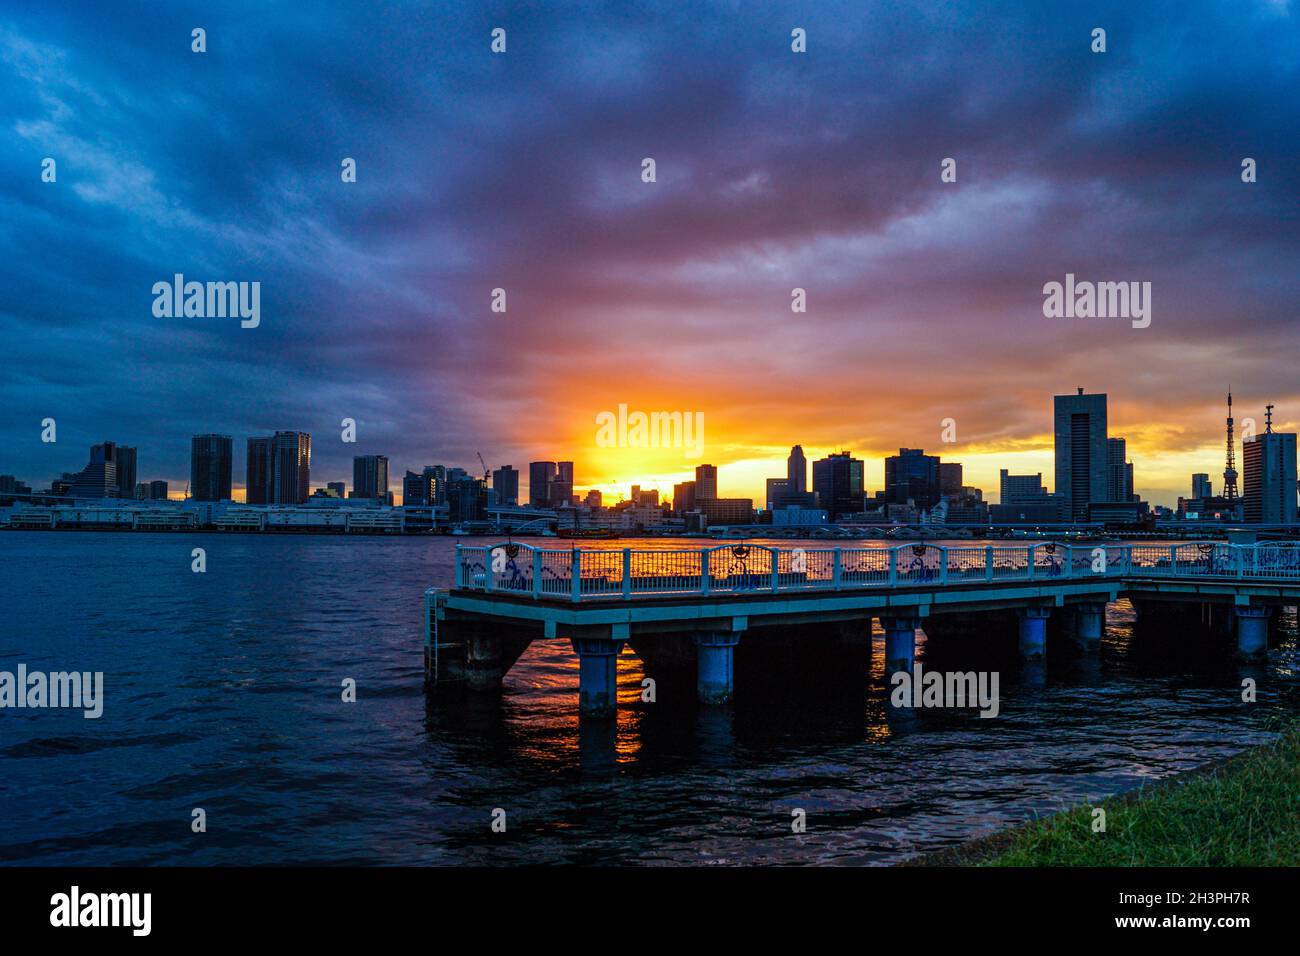 Tokyo skyline and sunset as seen from Harumi Pier Stock Photo